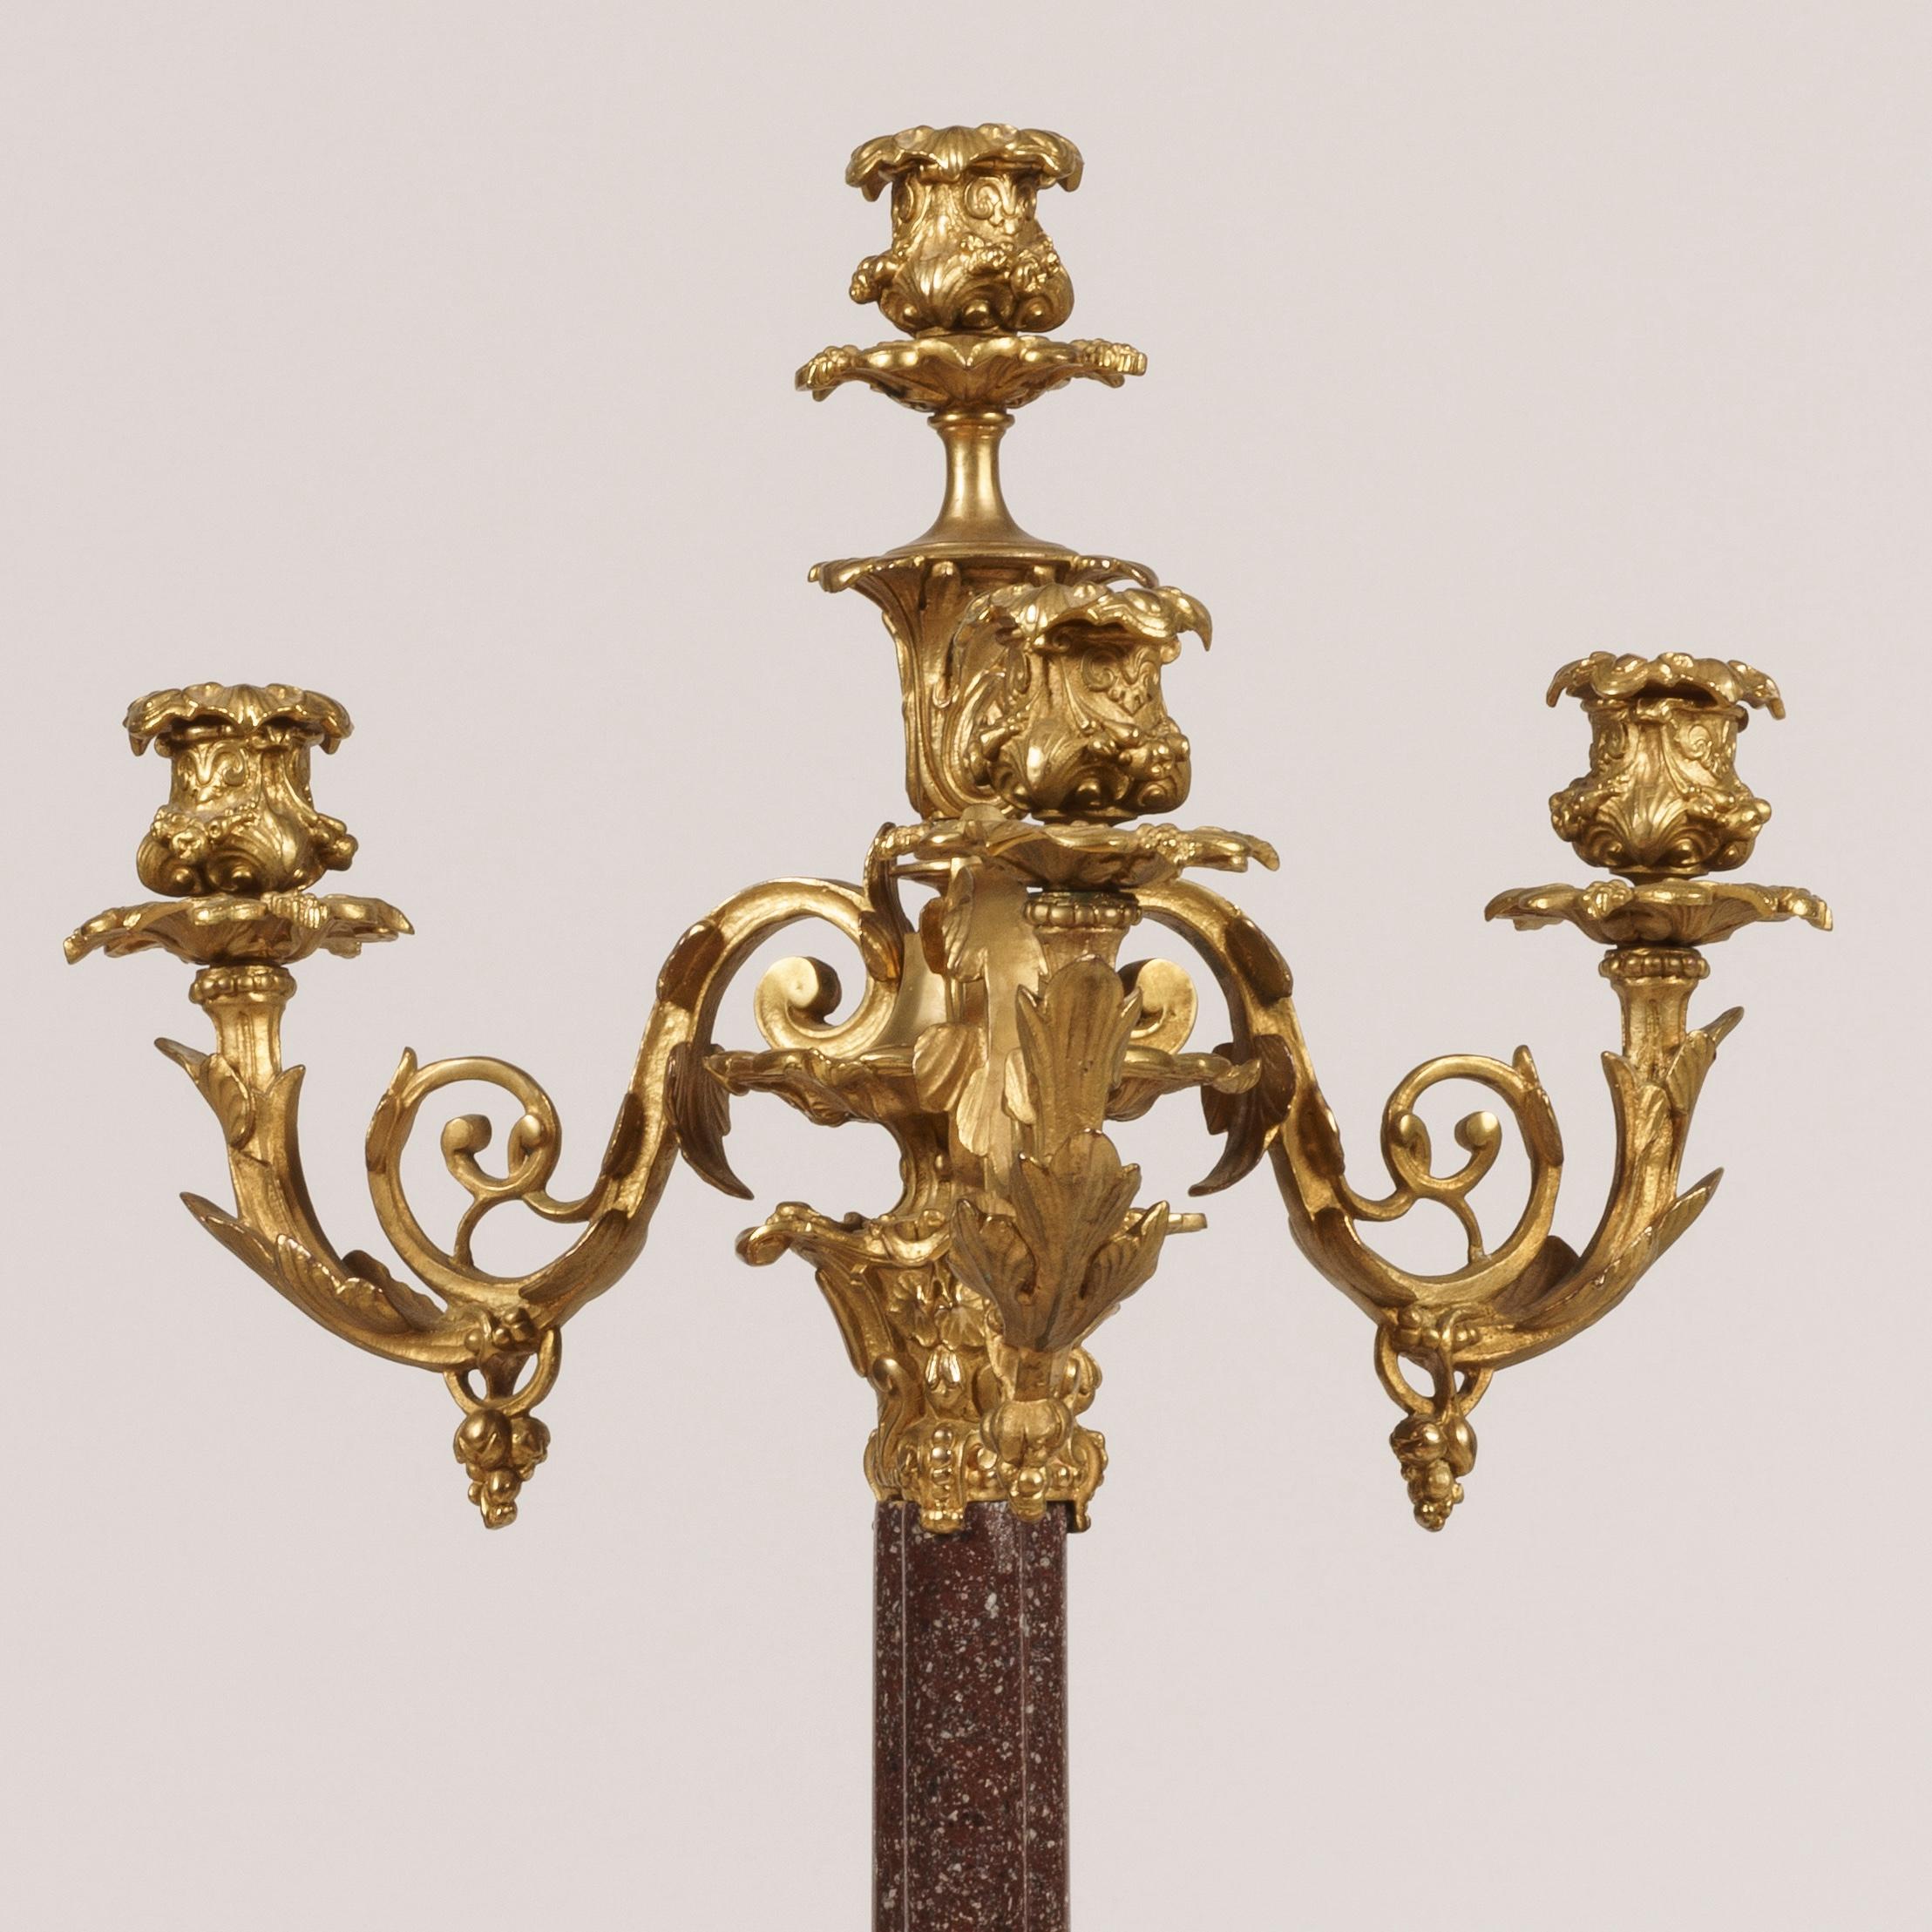 Gilt Pair of French 19th Century Porphyry and Ormolu Candelabra in Louis XVI Manner For Sale